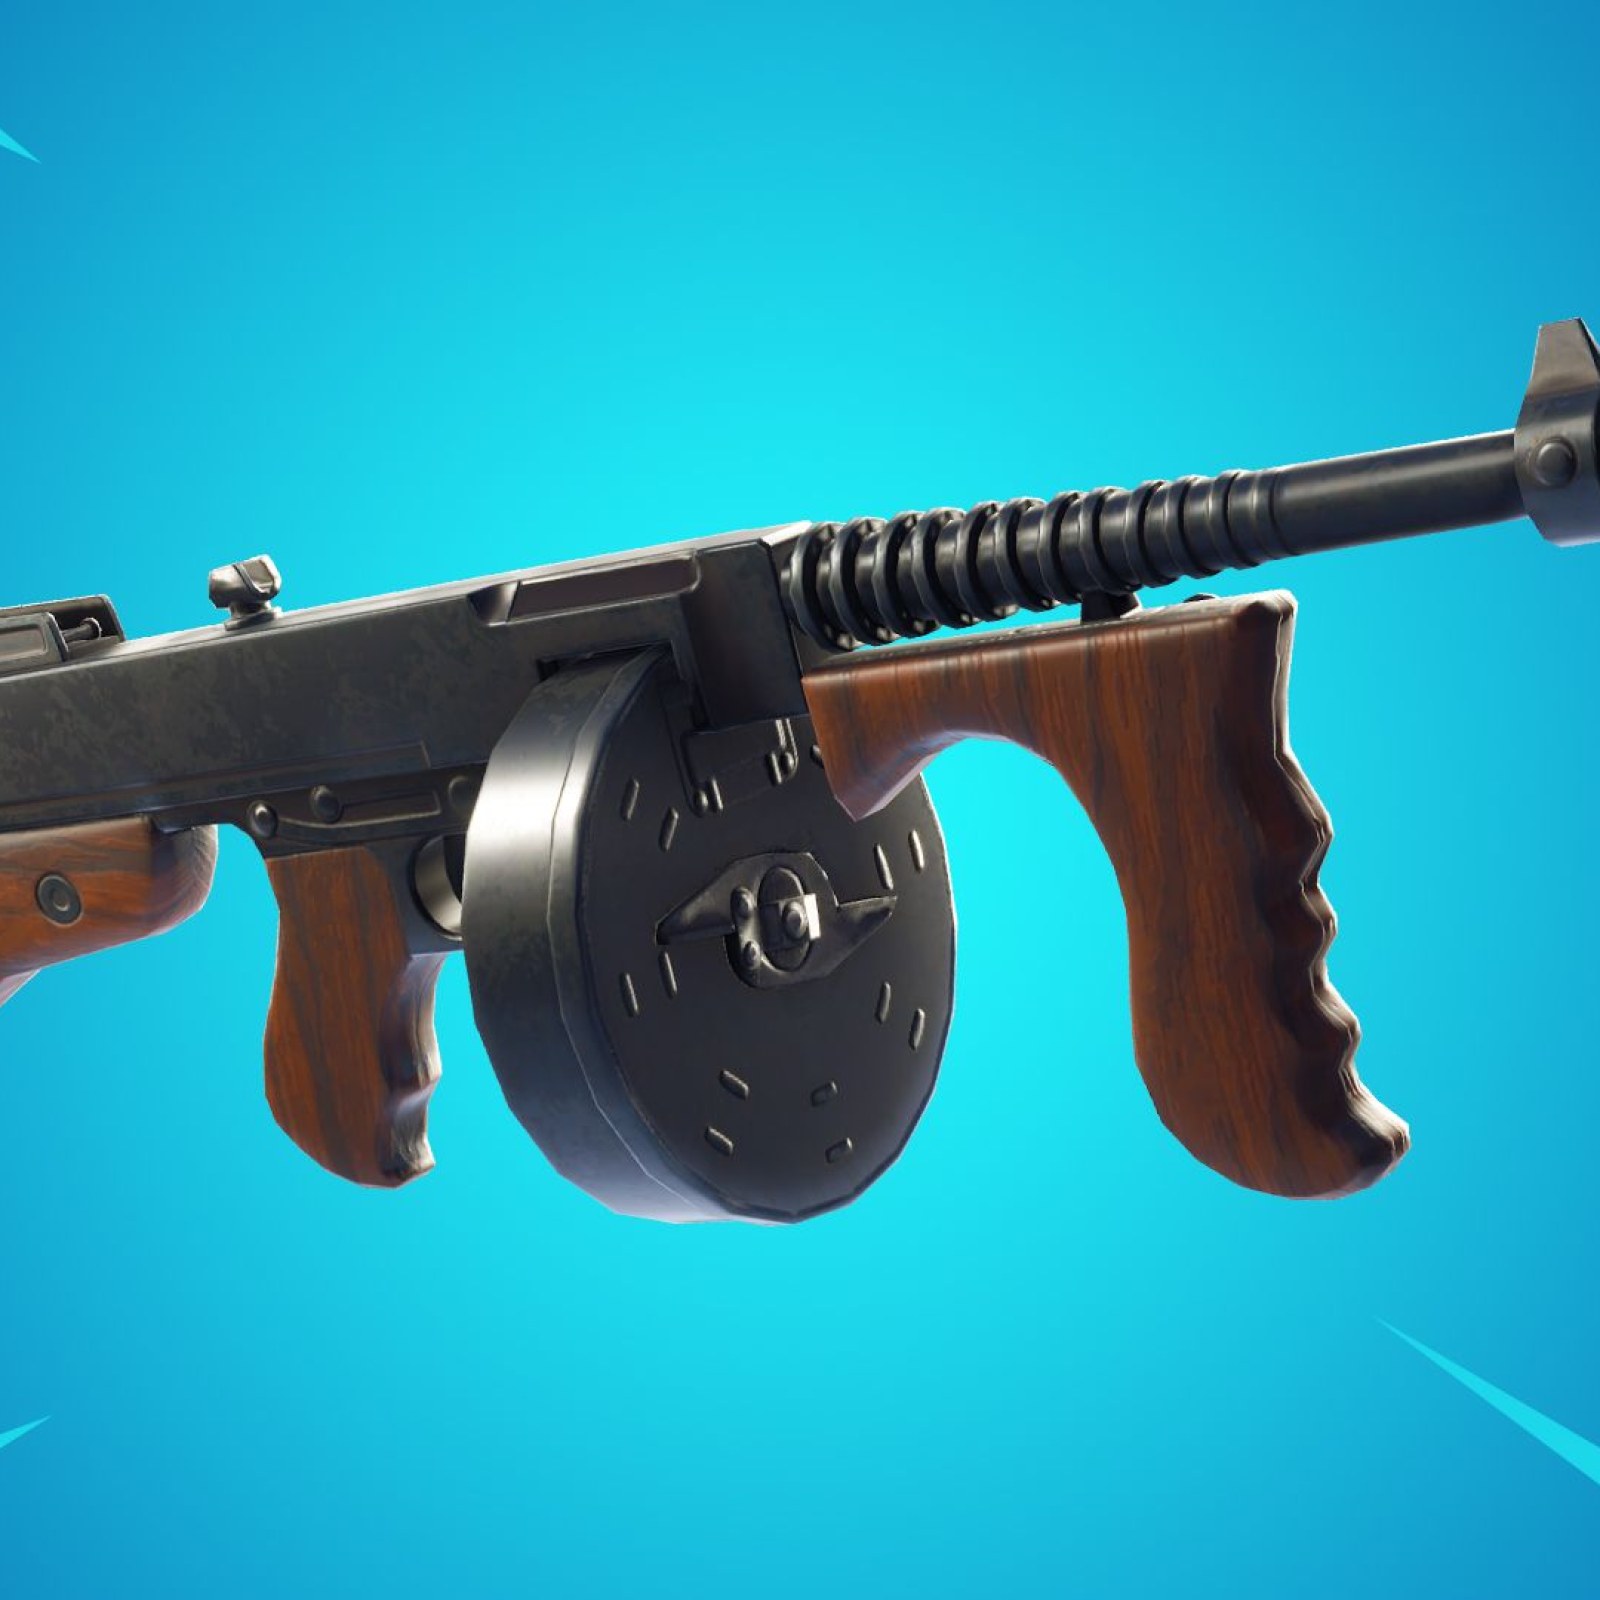 Fortnite Update 5 0 Adds Smg Removes Tactical Smg Patch Notes